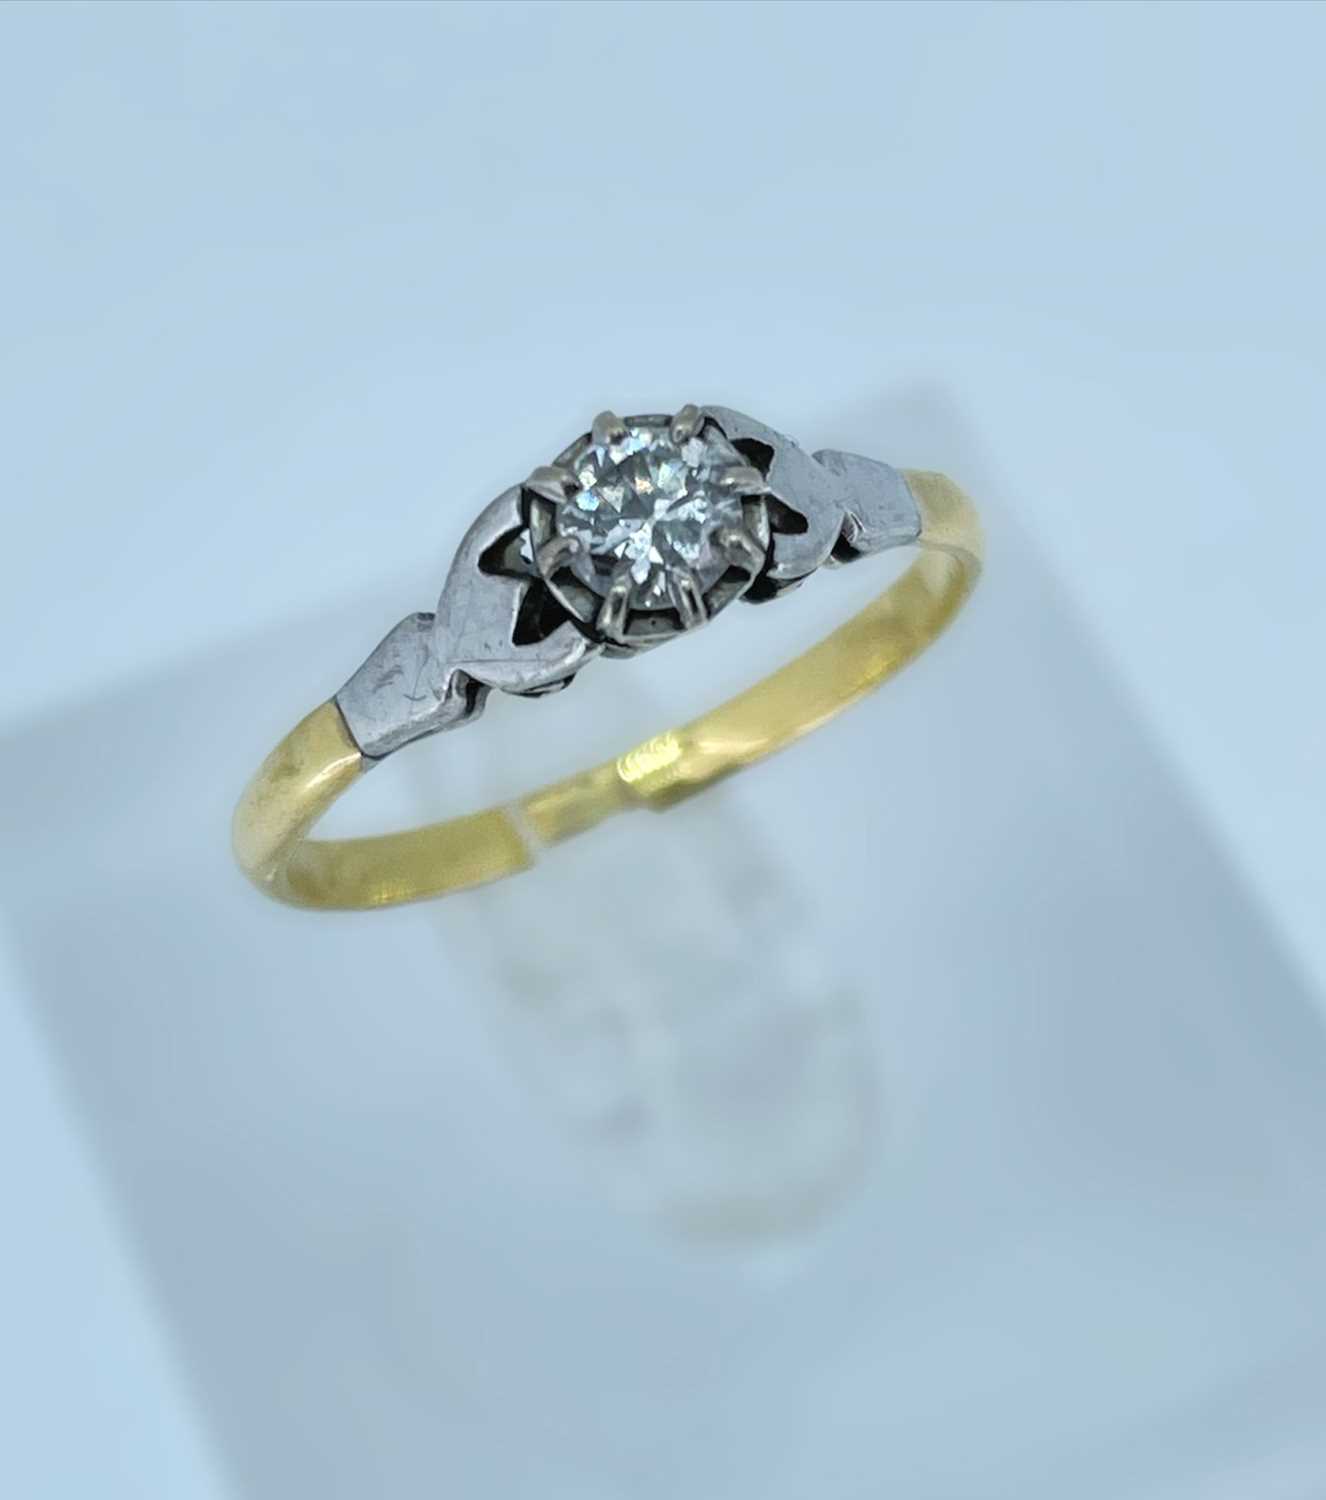 YELLOW GOLD DIAMOND SOLITAIRE RING, the single stone measuring 0.2cts approx., ring size R, 2.4gms - Image 2 of 2